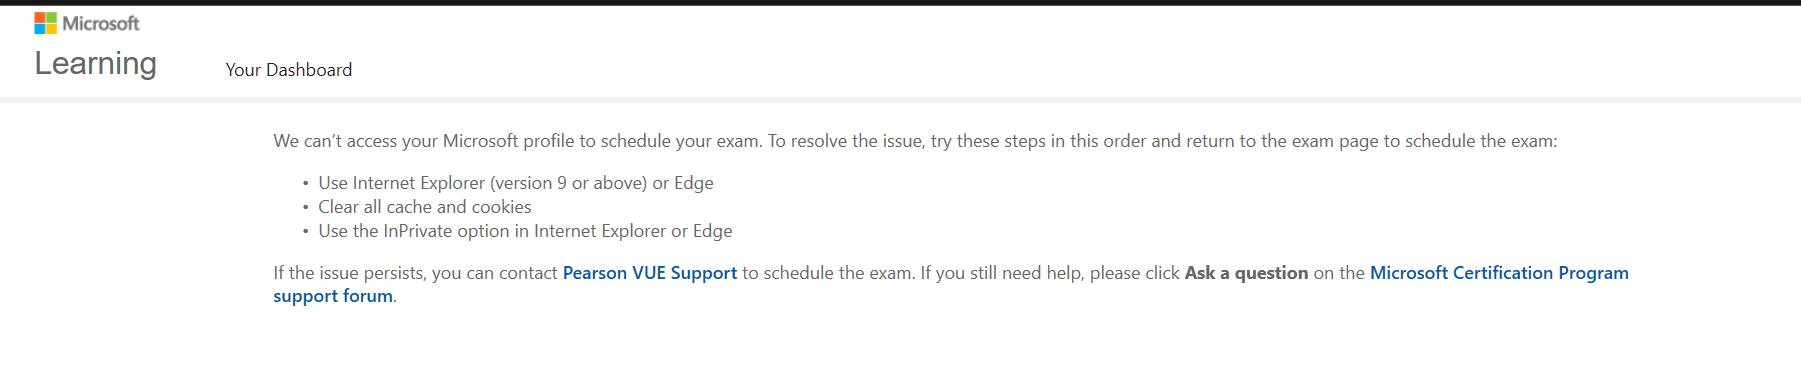 Can't Schedule Exam with Pearson VUE Support - Training, Certification